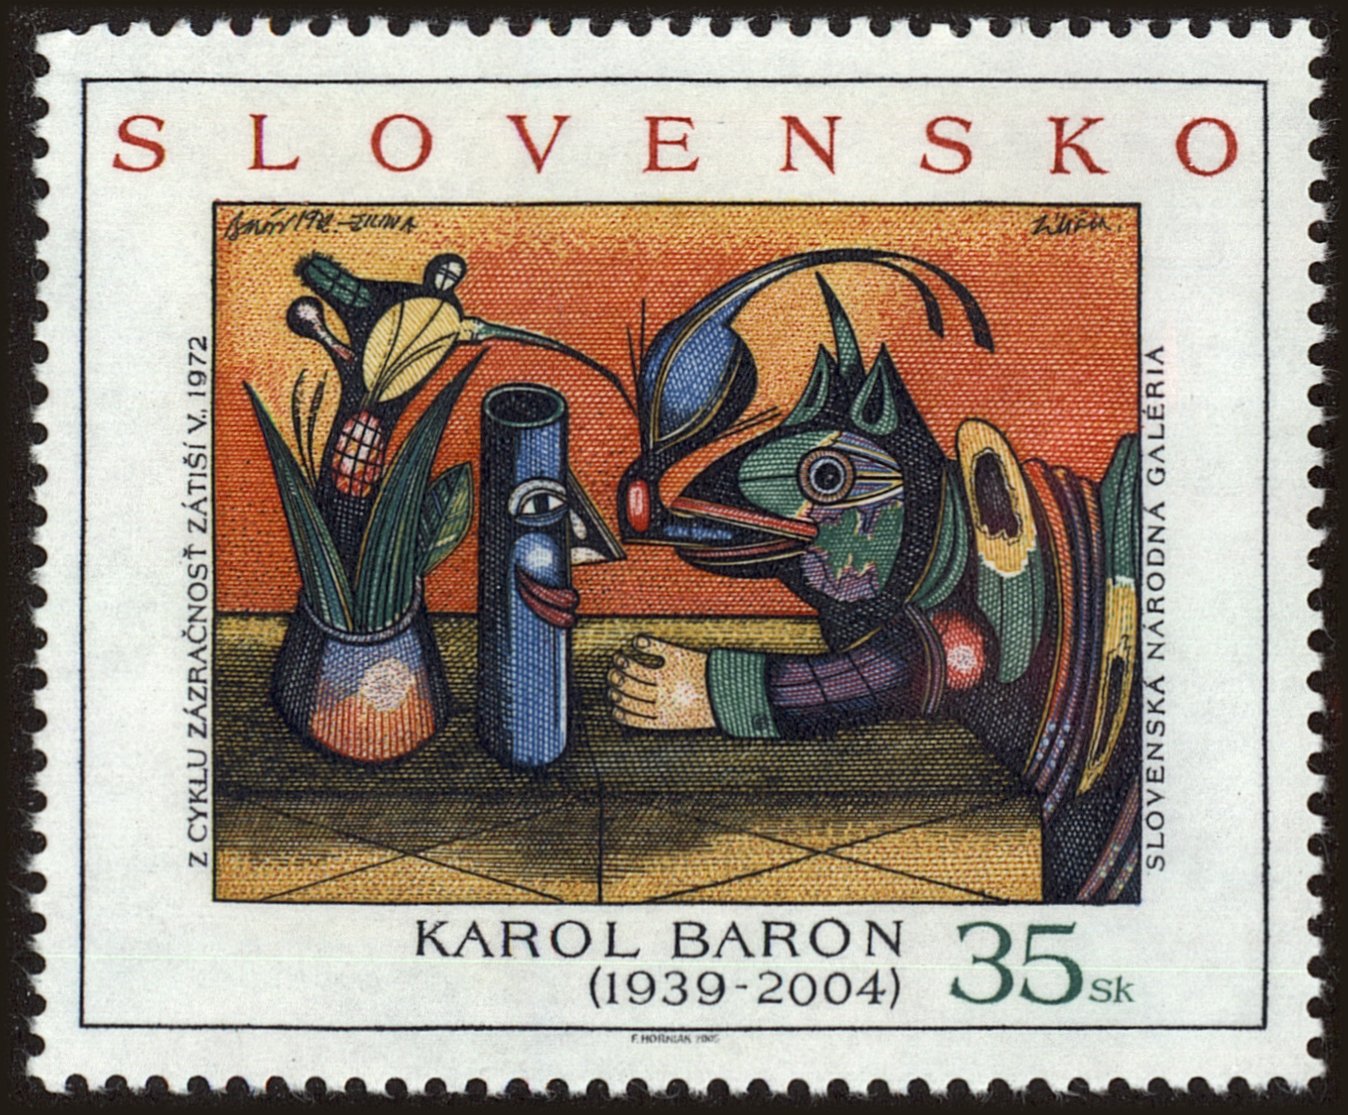 Front view of Slovakia 489 collectors stamp